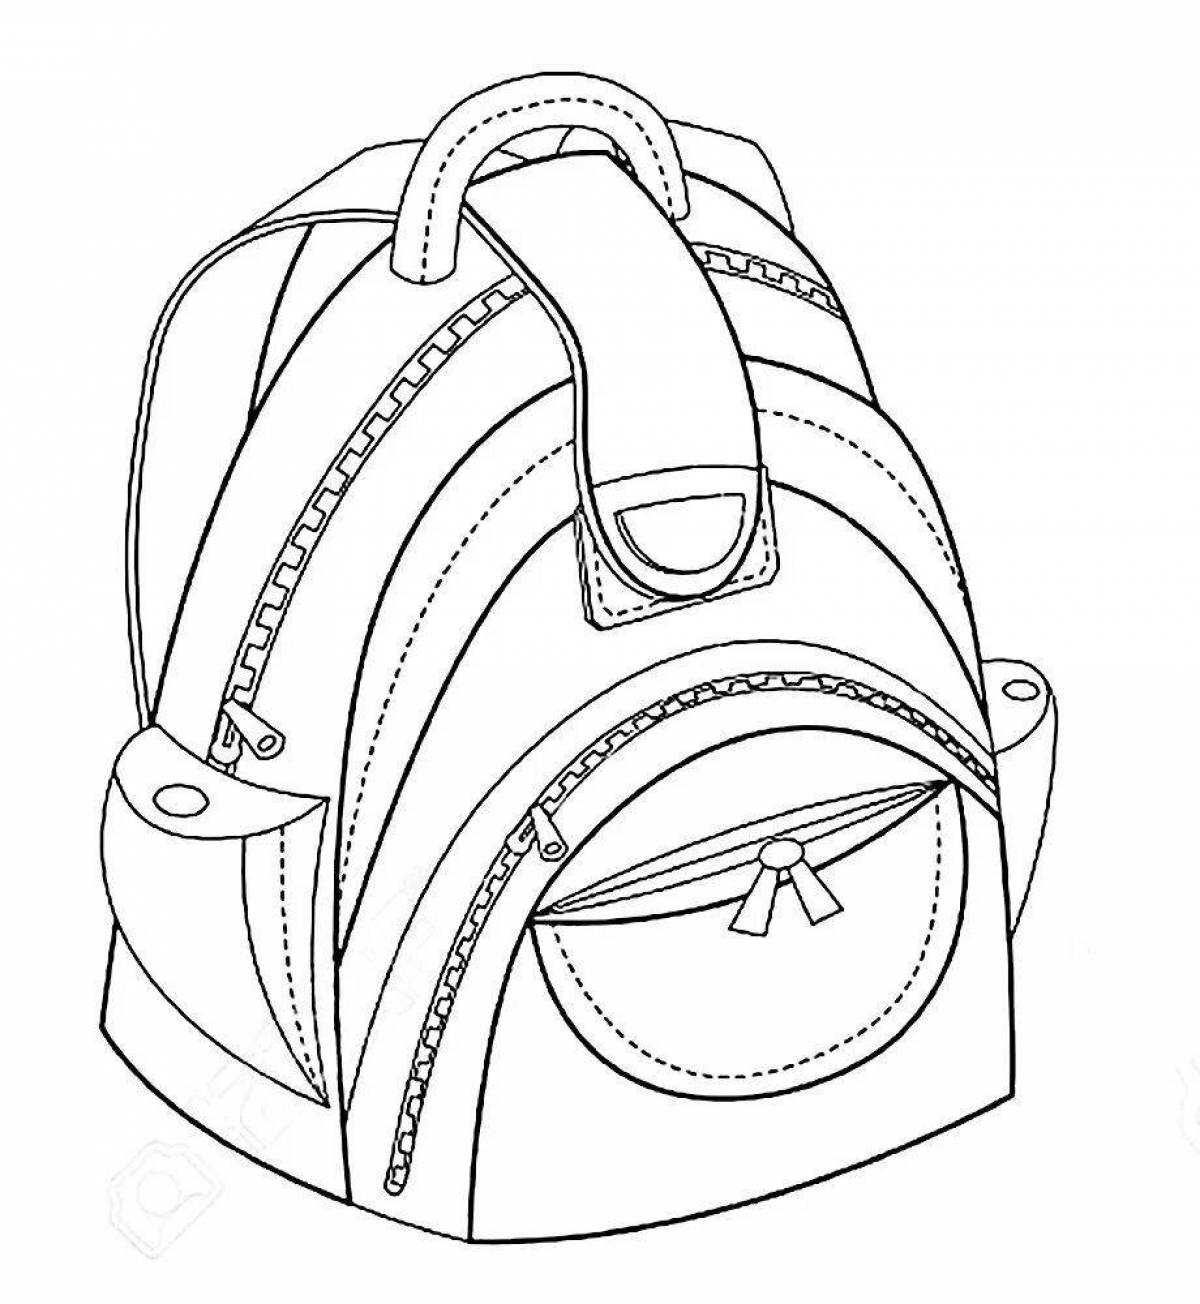 Colourful school bag coloring page